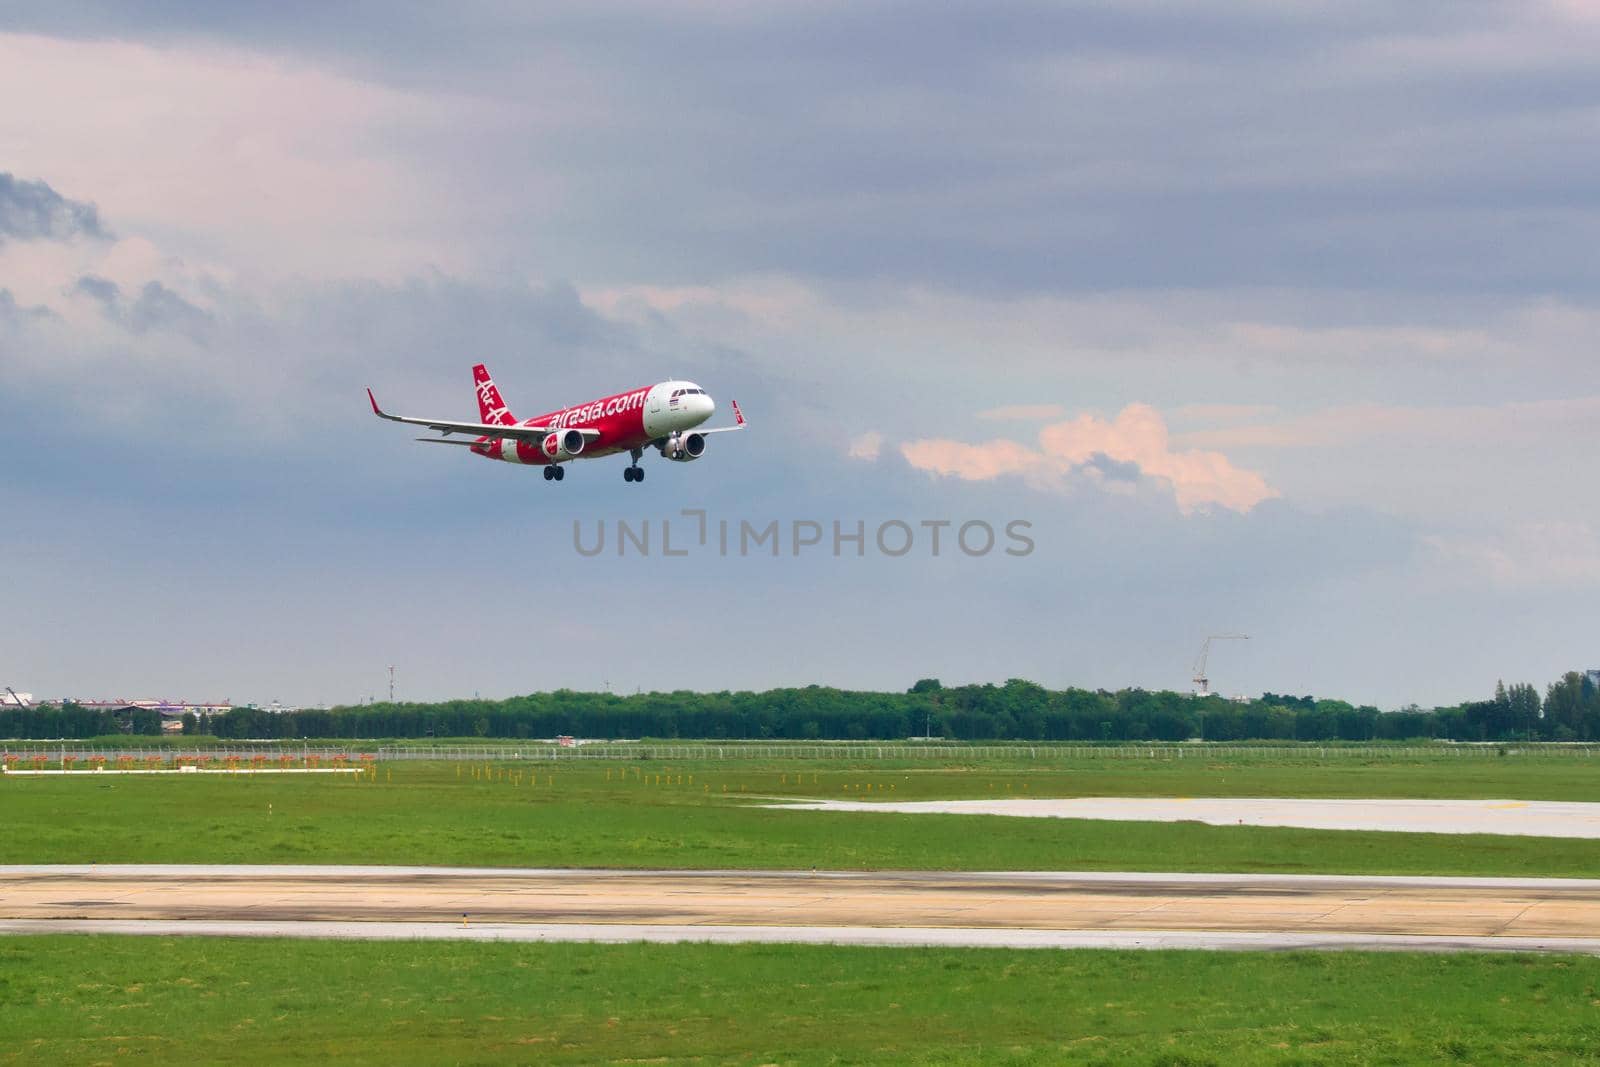 2019-11-14 / Ho Chi Minh City, Vietnam - An Air Asia airliner lining up on the final approach for landing. by hernan_hyper